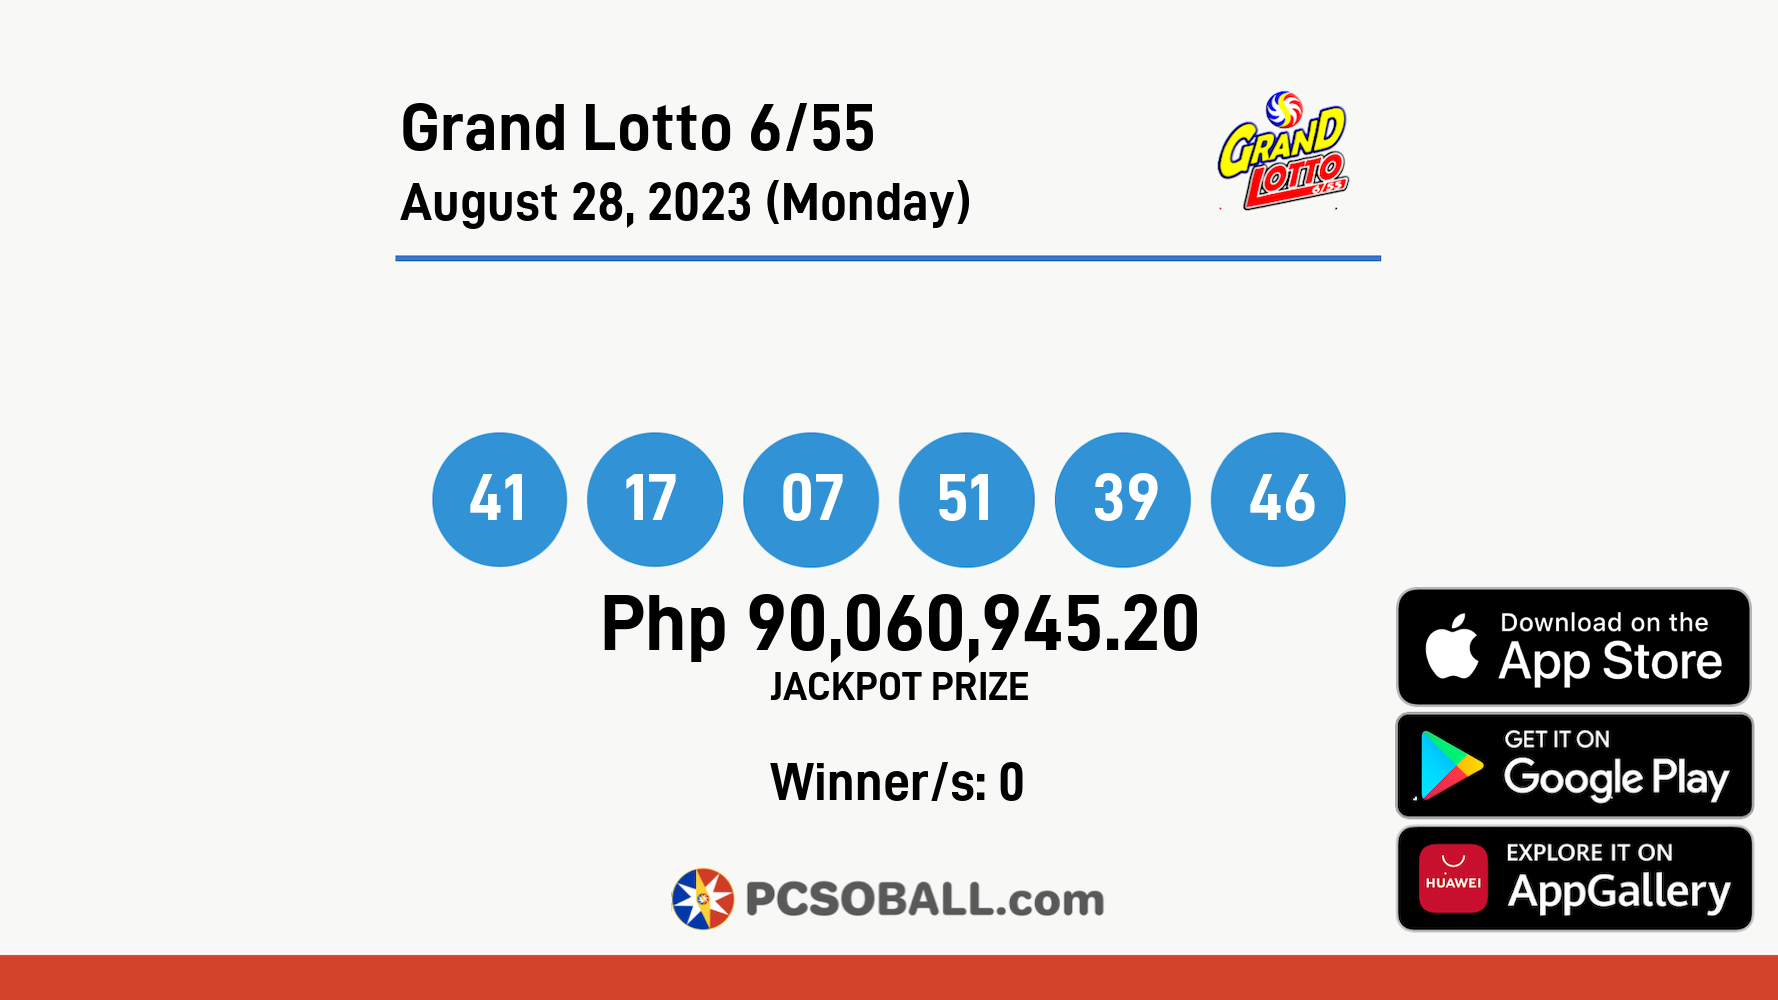 Grand Lotto 6/55 August 28, 2023 (Monday) Result